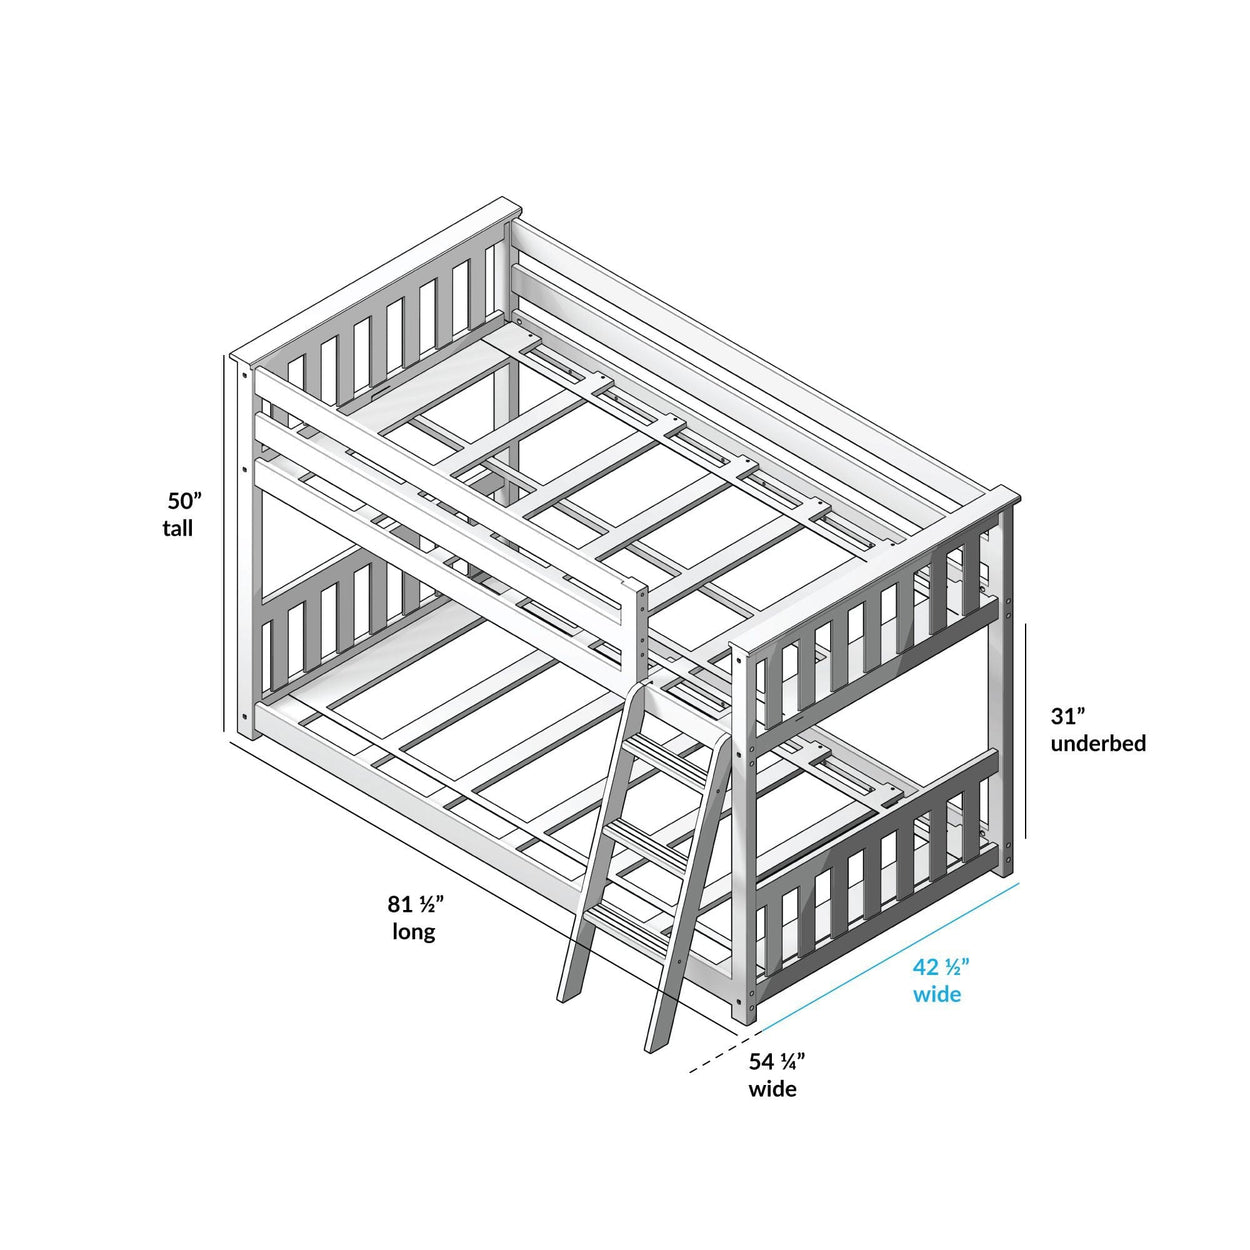 180214131309 : Bunk Beds Twin over Twin Low Bunk with Three Guard Rails, Blue